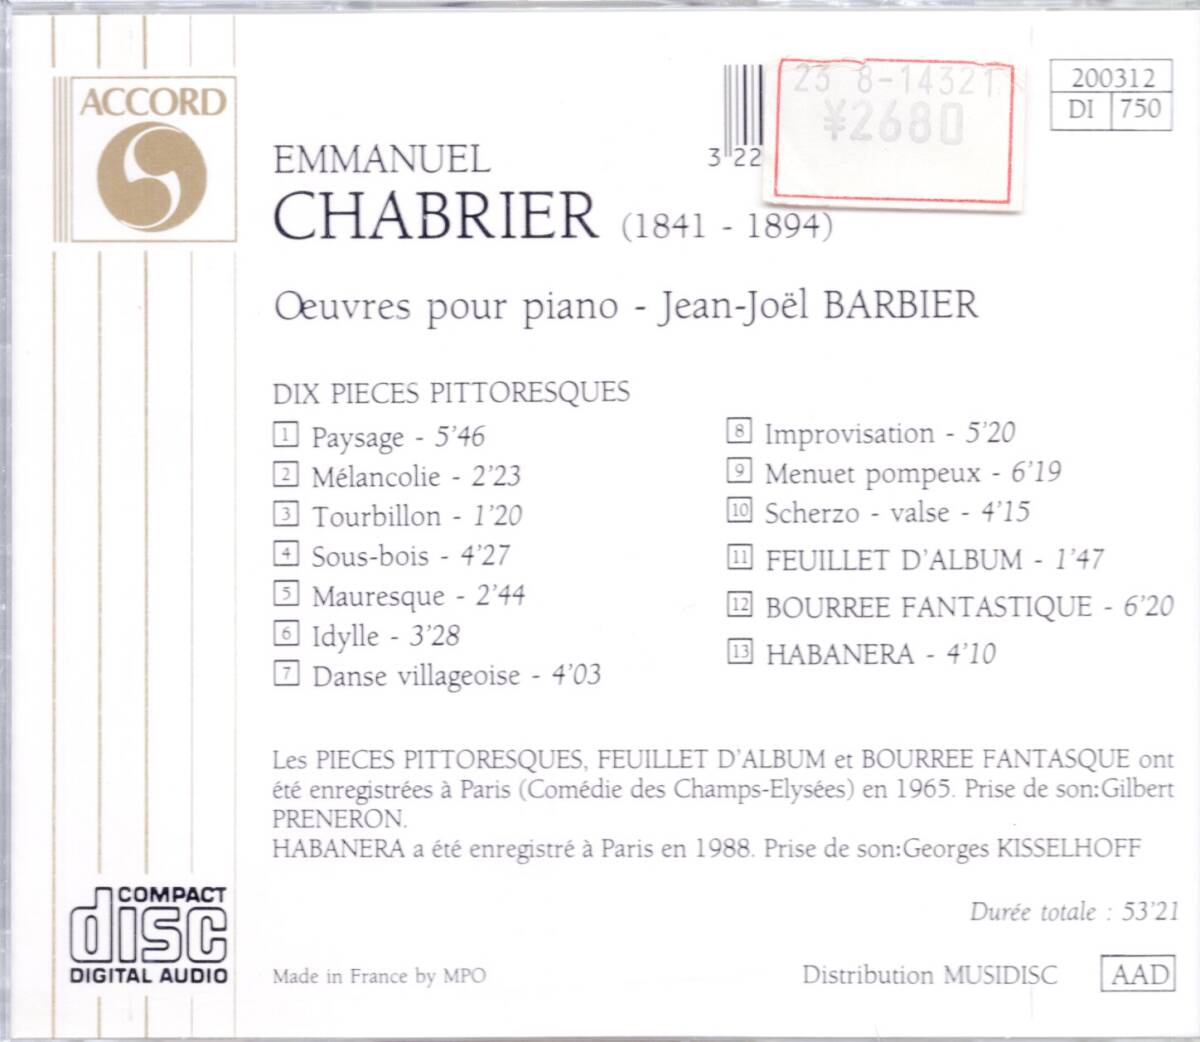 a776 CHABRIER: OEUVRES POUR PIANO /BARBIERの画像2